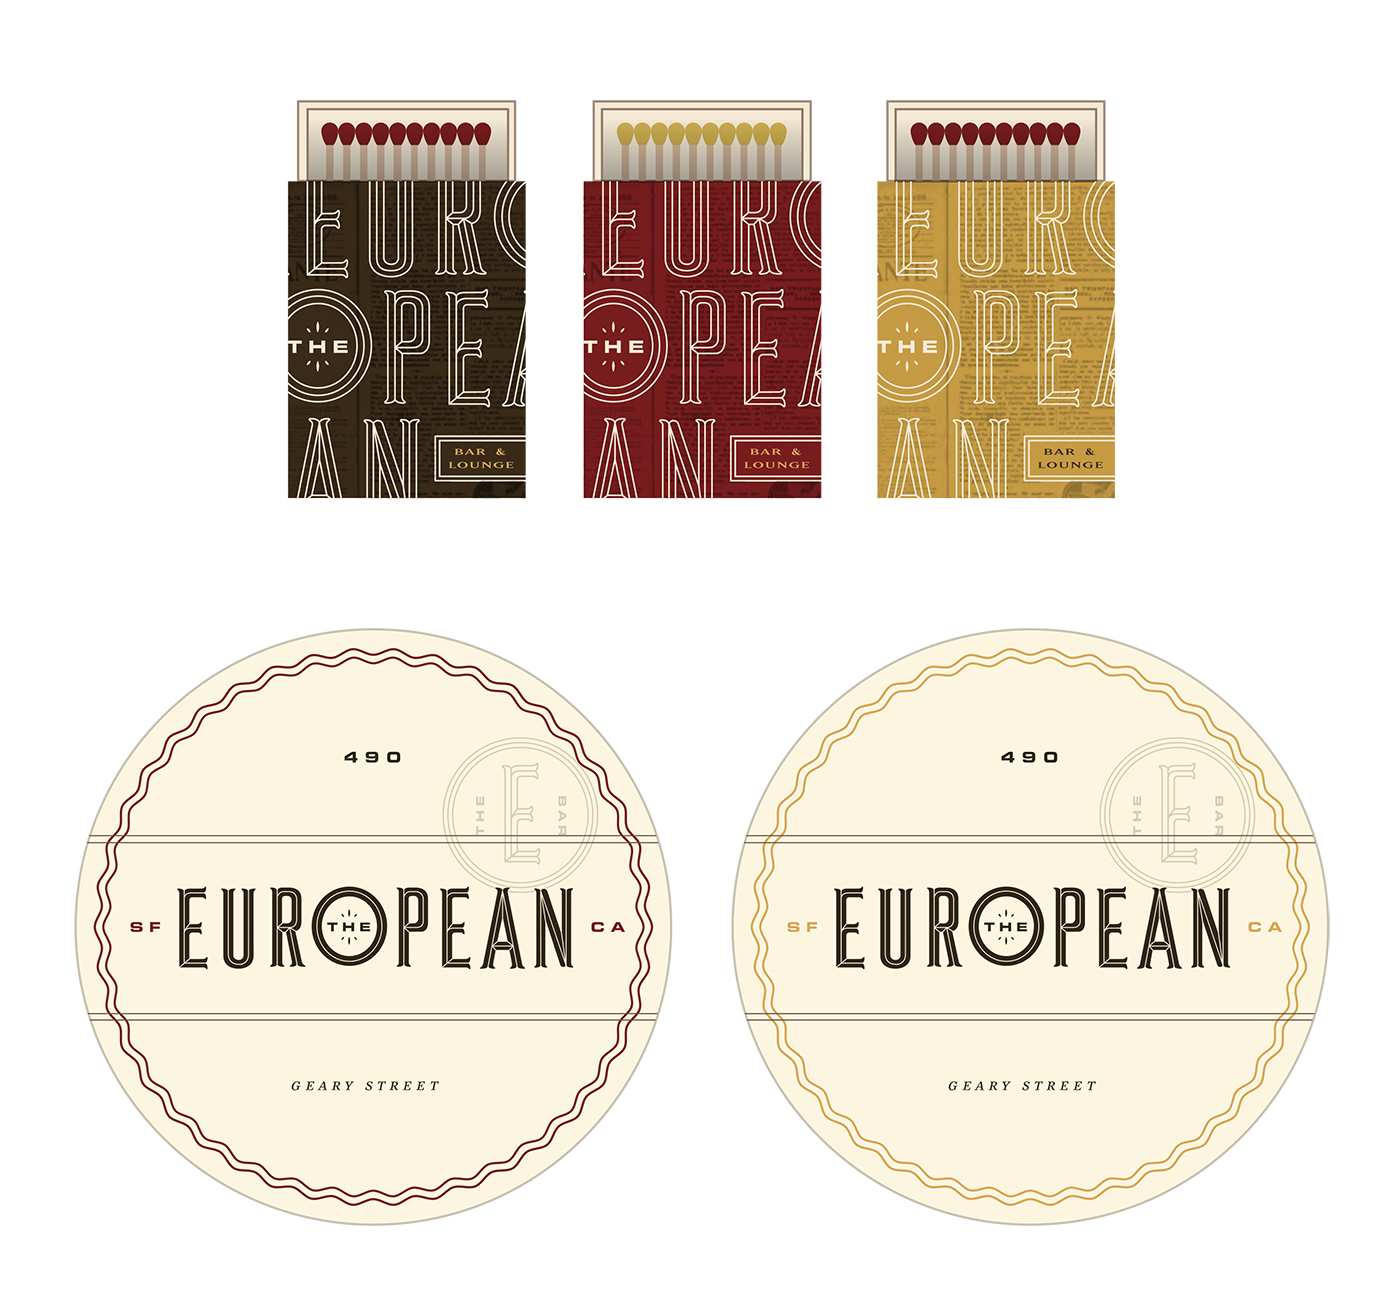 The European matchbox and coasters